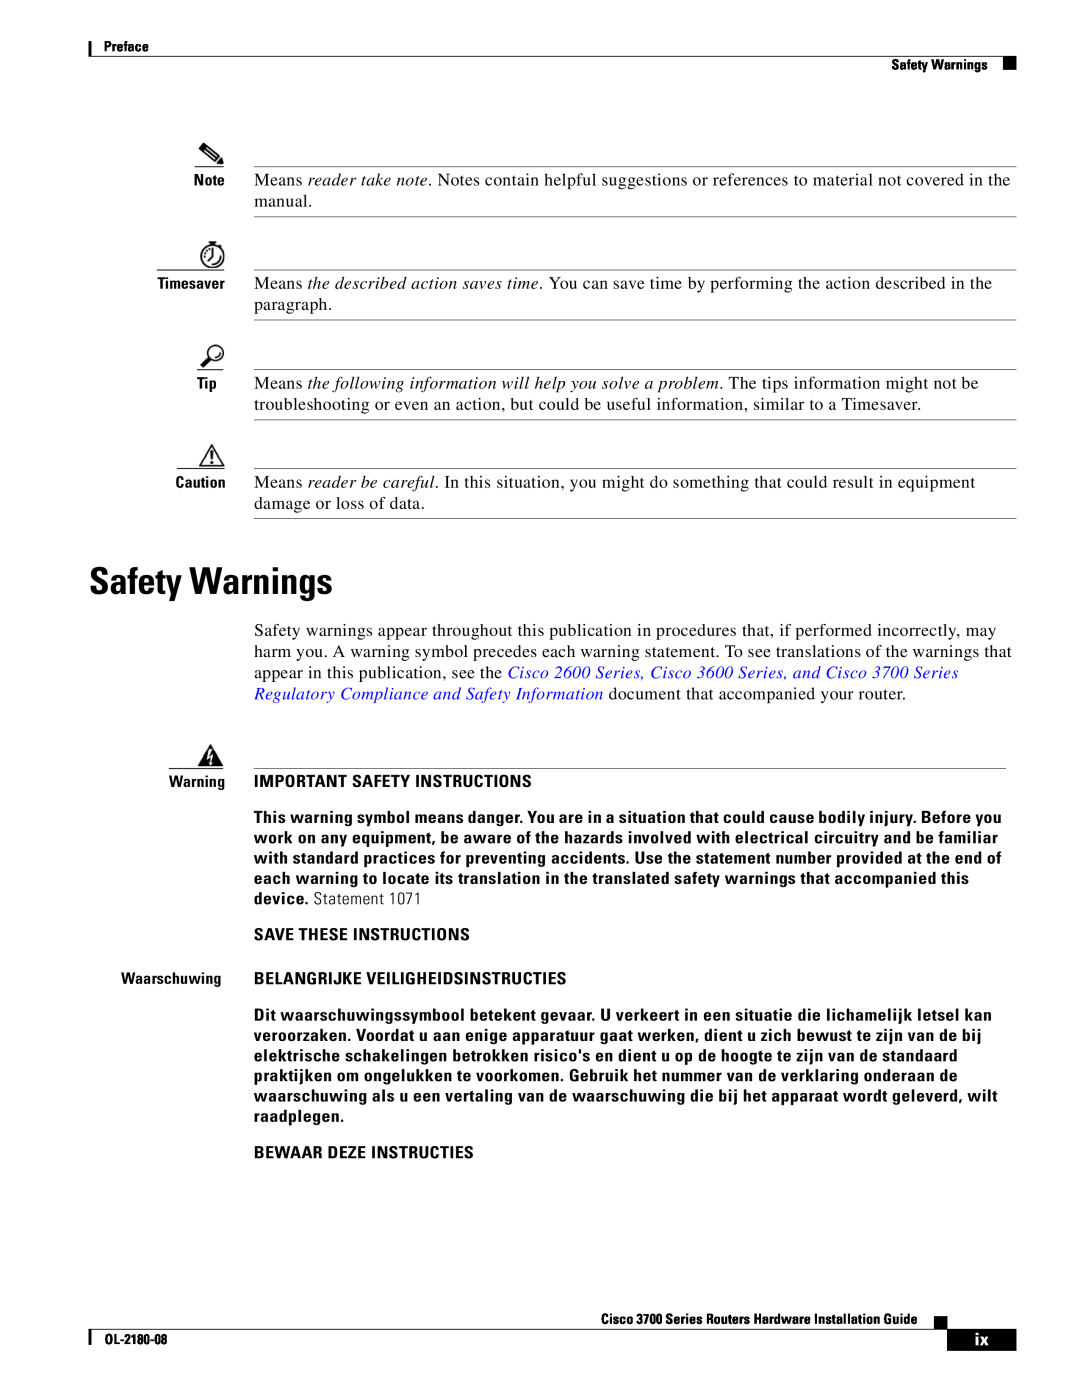 Cisco Systems 3700 Series manual Safety Warnings 